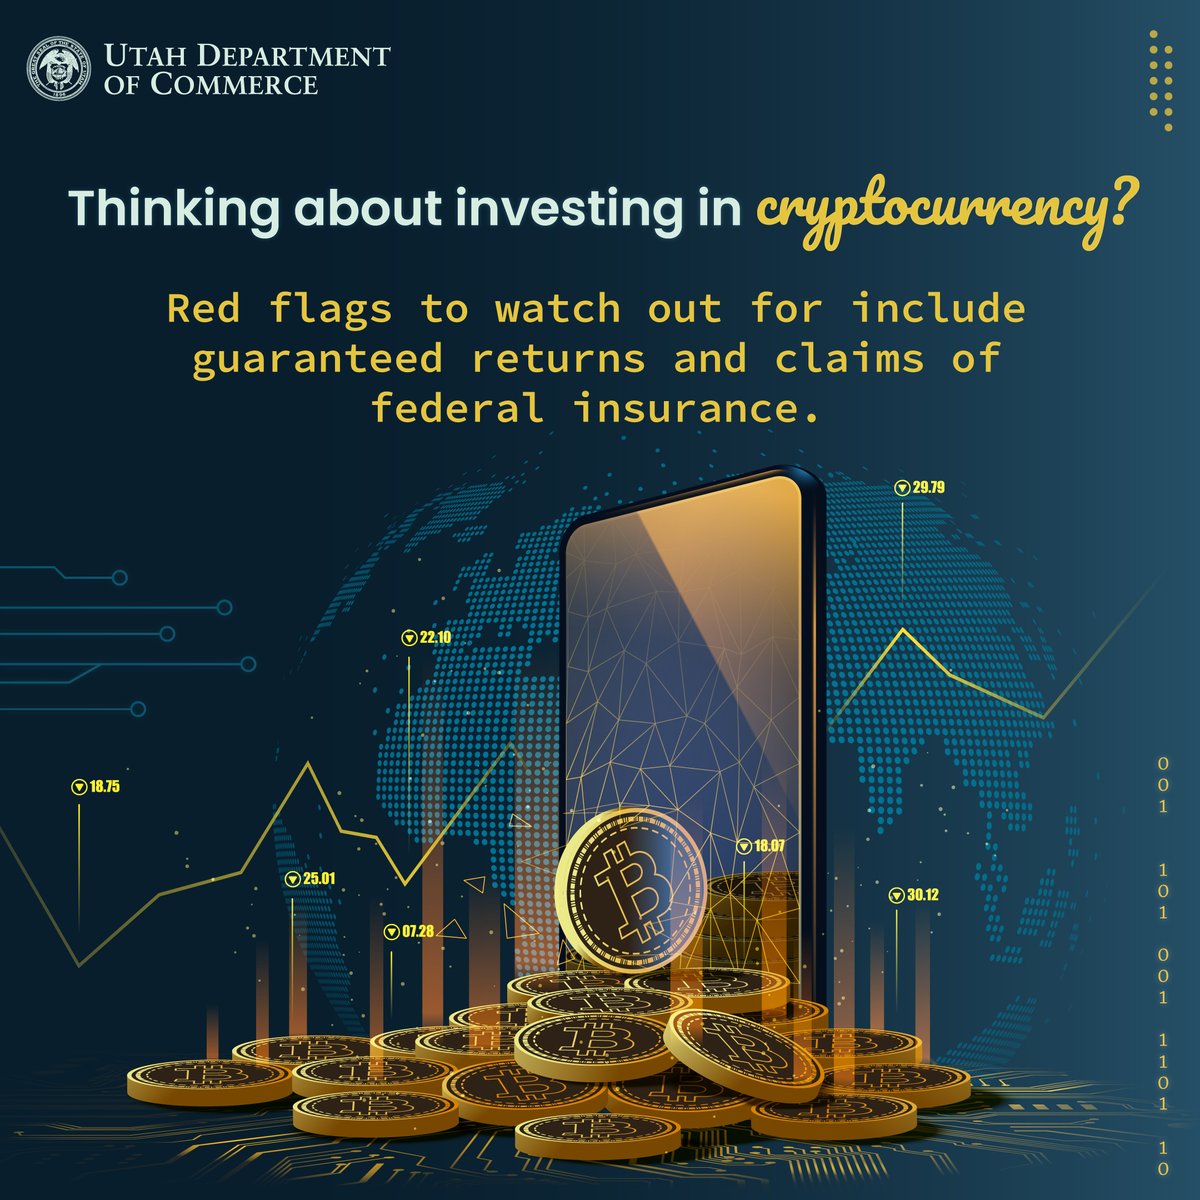 If you are thinking about investing in cryptocurrency, know the red flags to watch for: •Guaranteed oversized returns. •Limited payment options. •False claims of federal insurance. •Unsolicited online offers. Learn additional warning signs: cftc.gov/sites/default/….